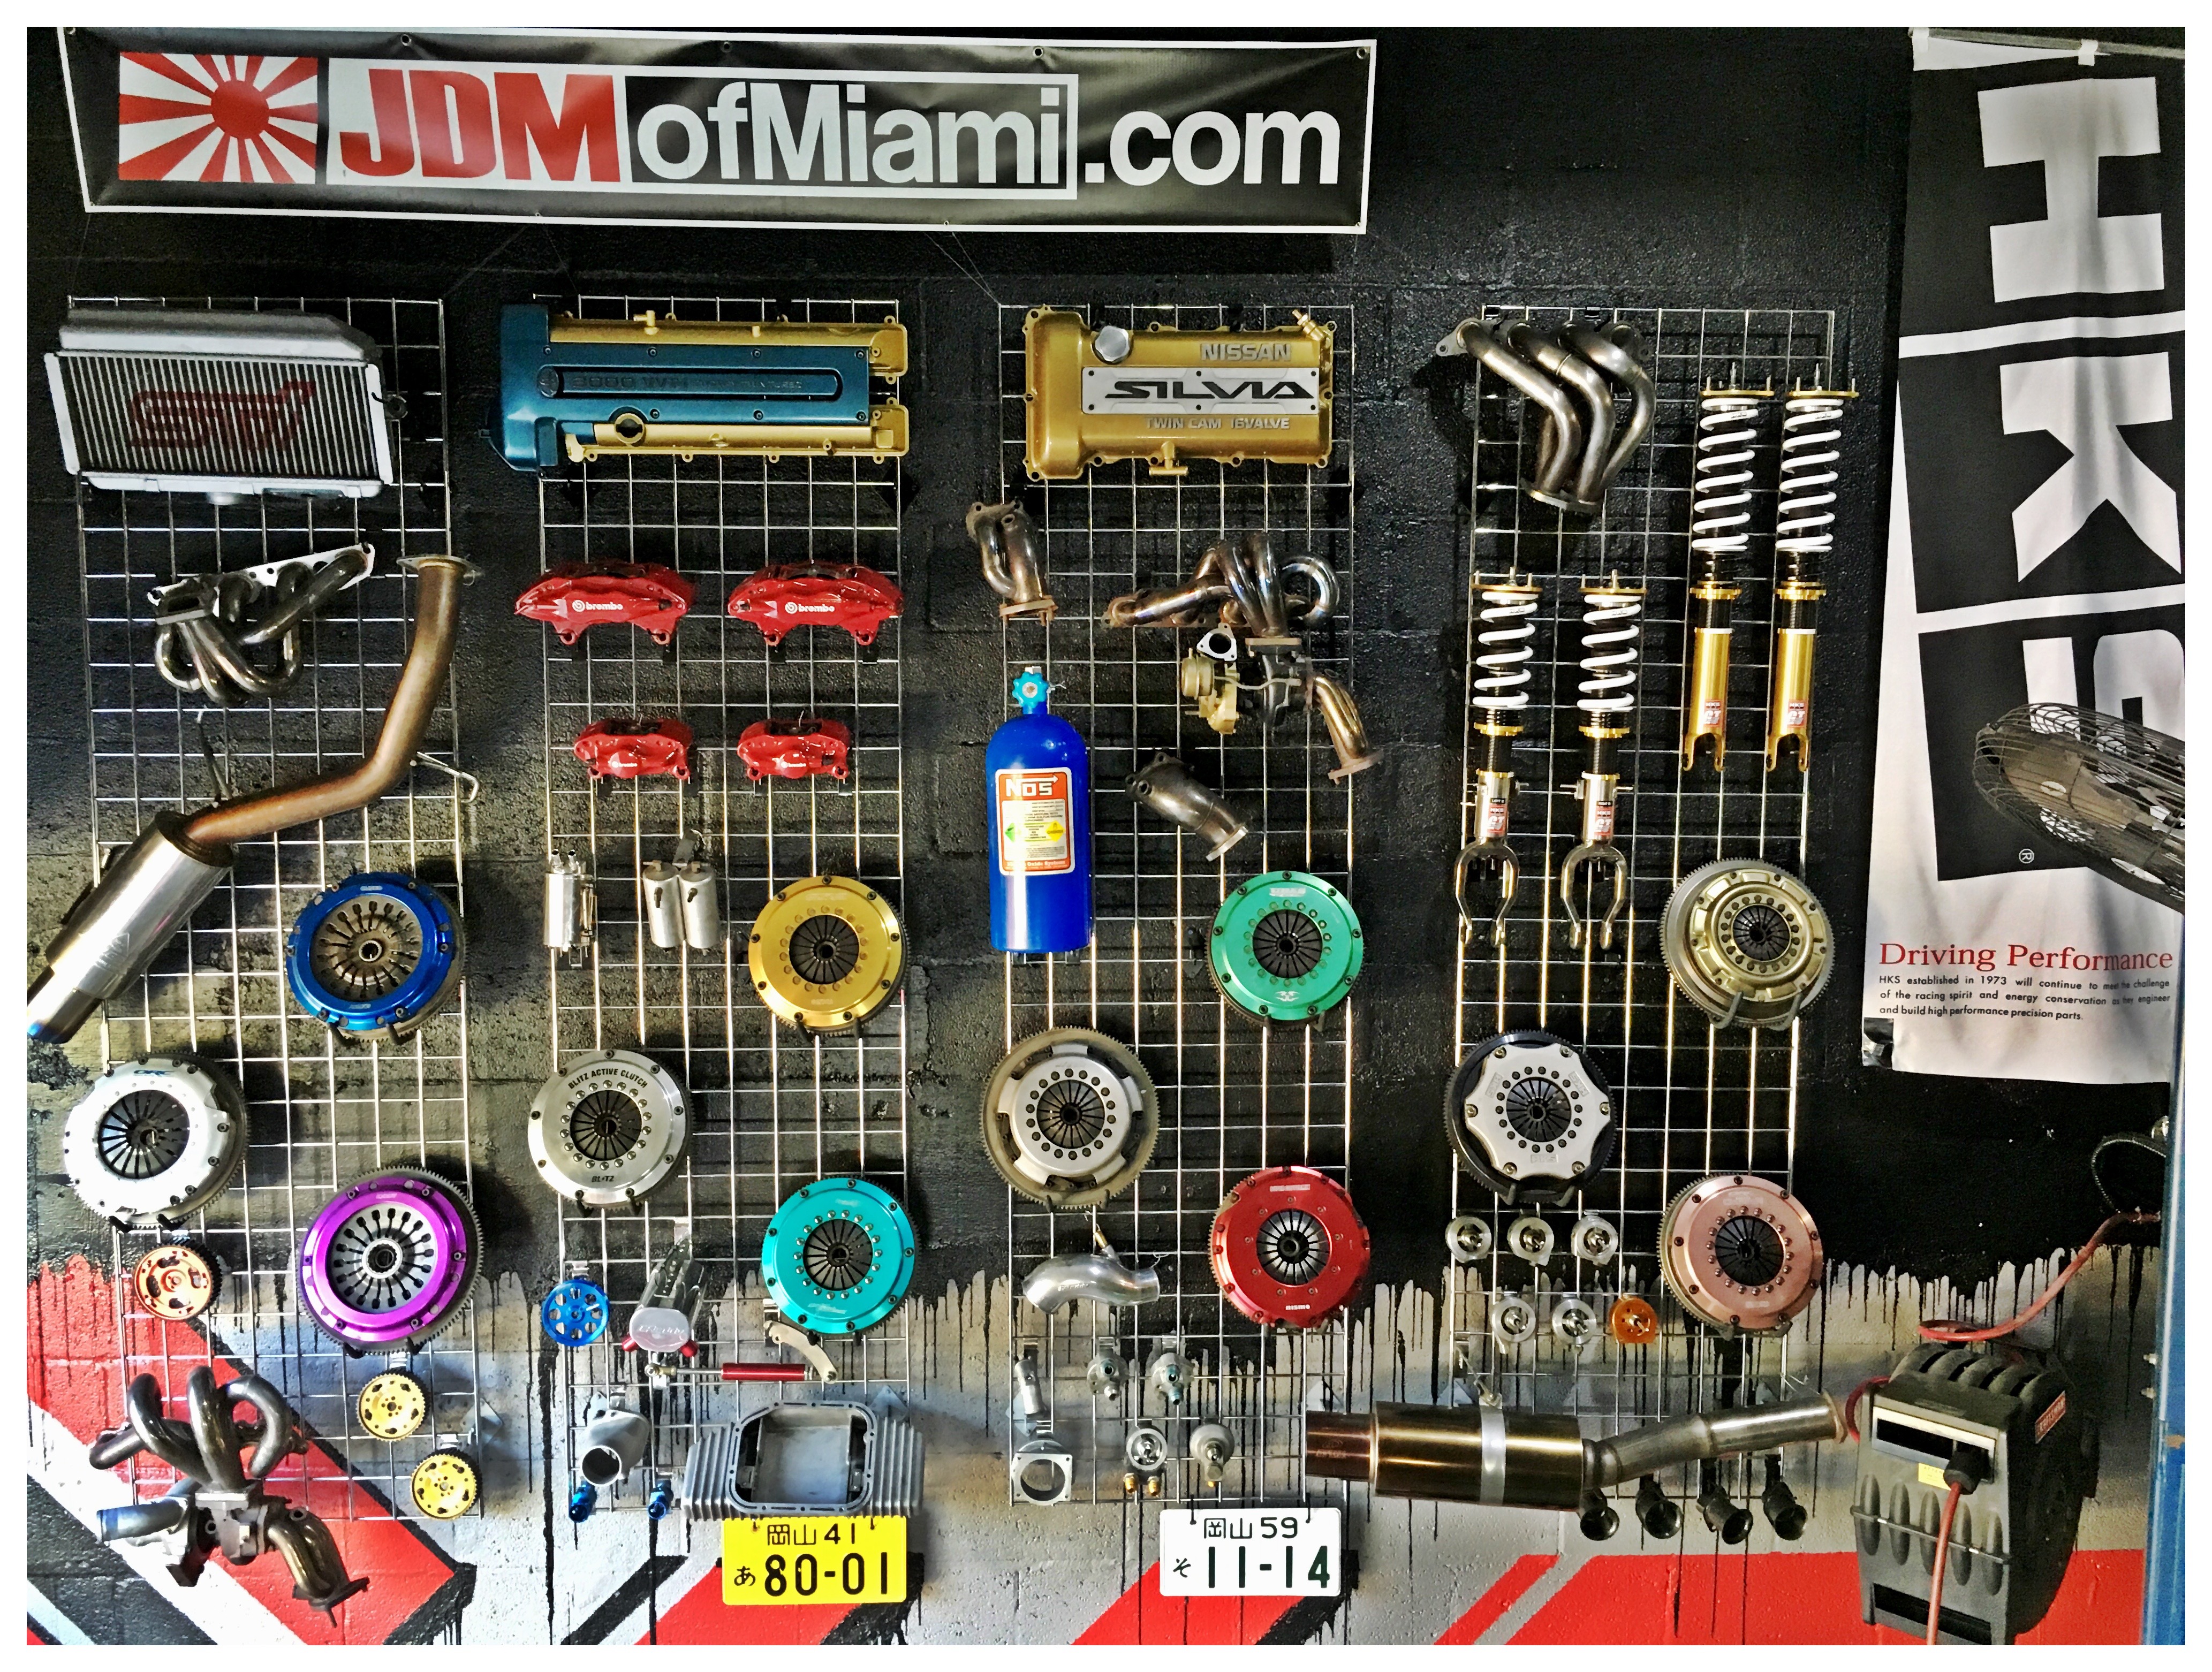 JDM of Miami – The source for quality JDM parts and accessories